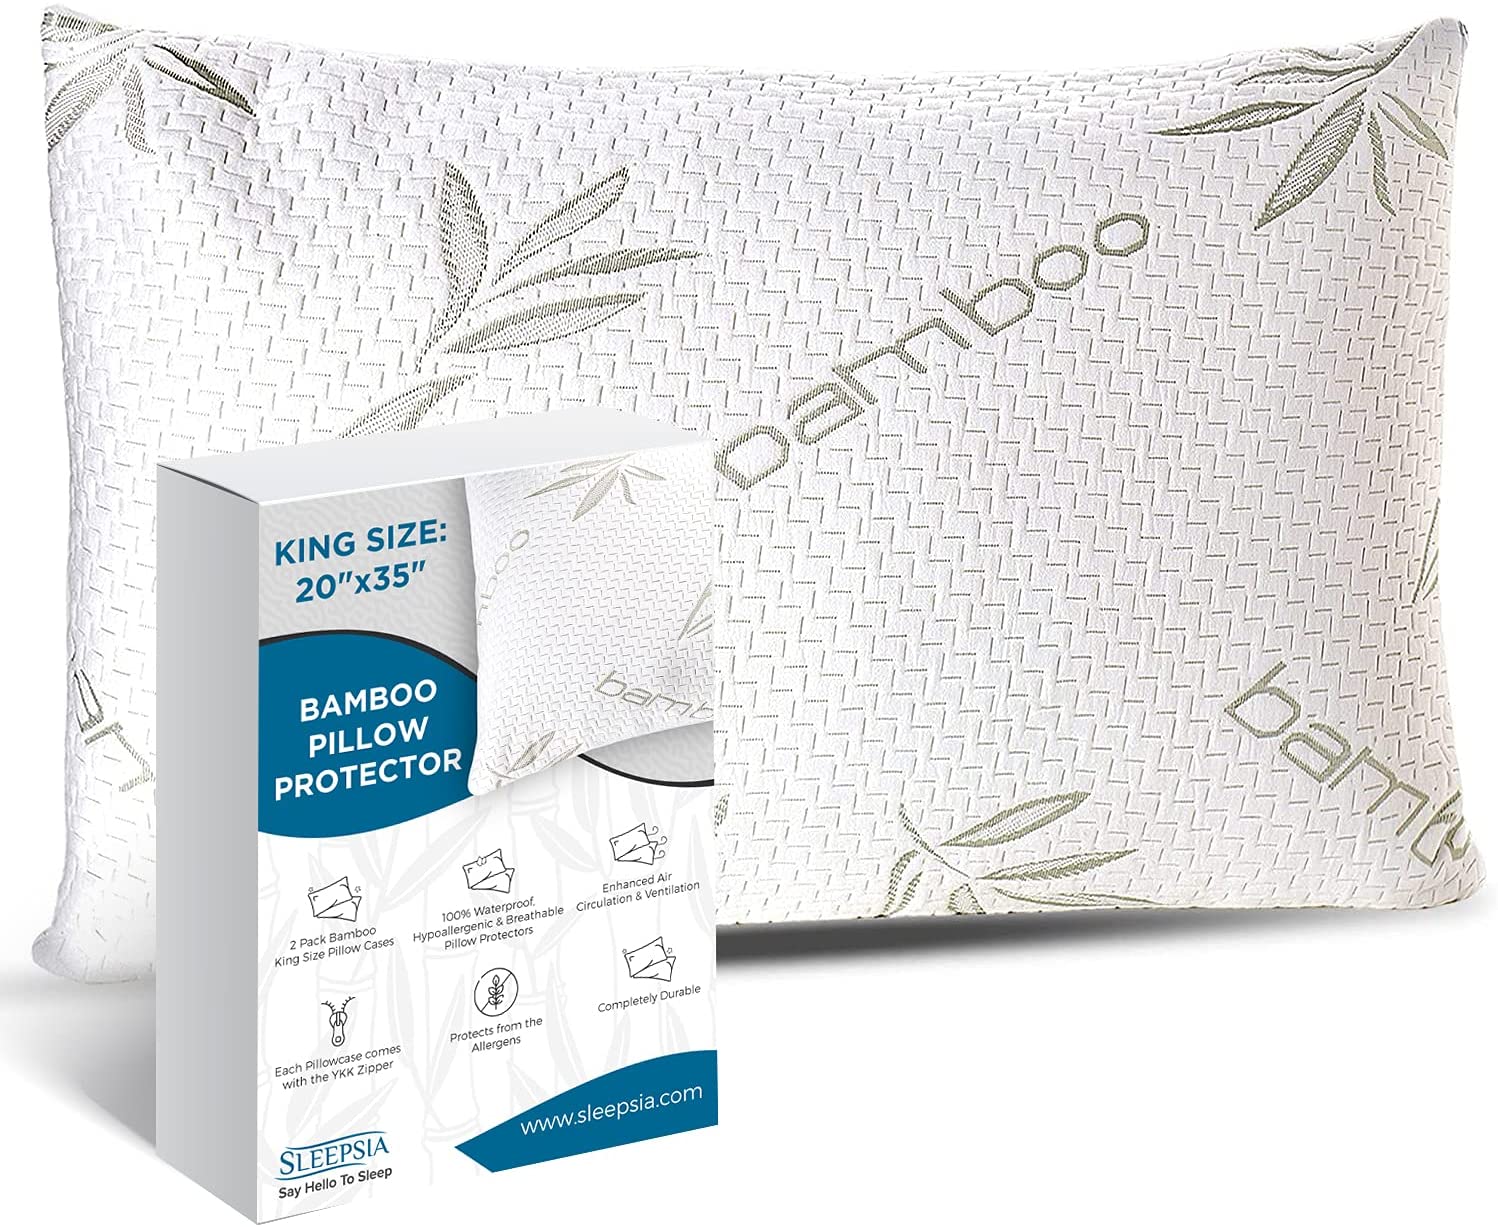 Why You Should Start Using A Pillow Protector?